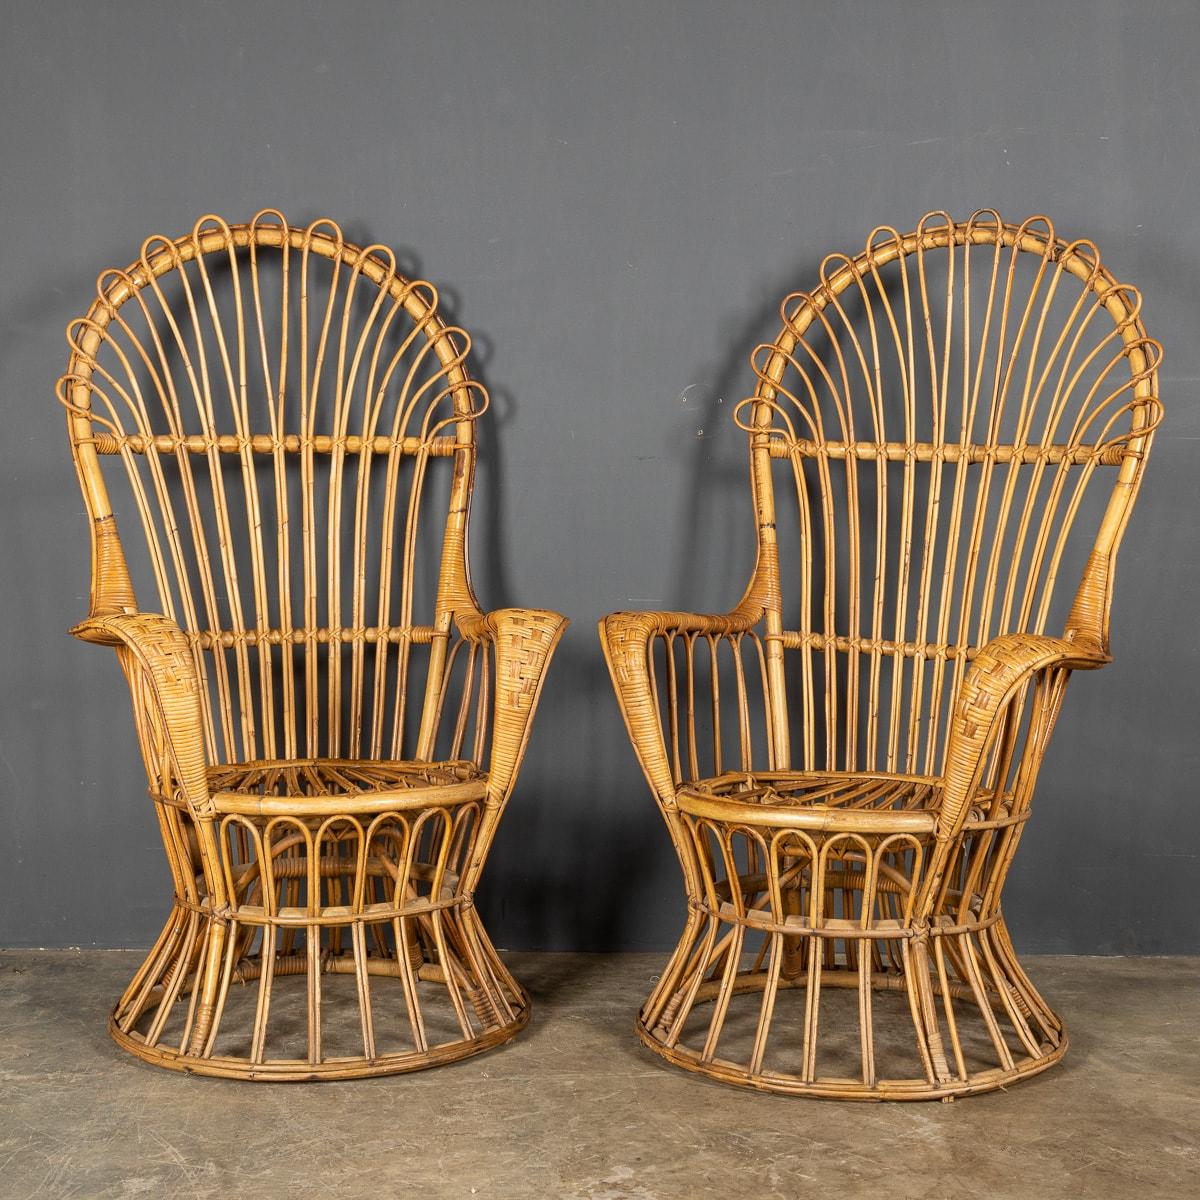 A lovely and very unusual pair of high backed chairs realised entirely out of bamboo, great addition to any room or conservatory.

CONDITION
In Great Condition - no damage.

SIZE
Height: 131cm
Width: 80cm
Depth: 51cm.